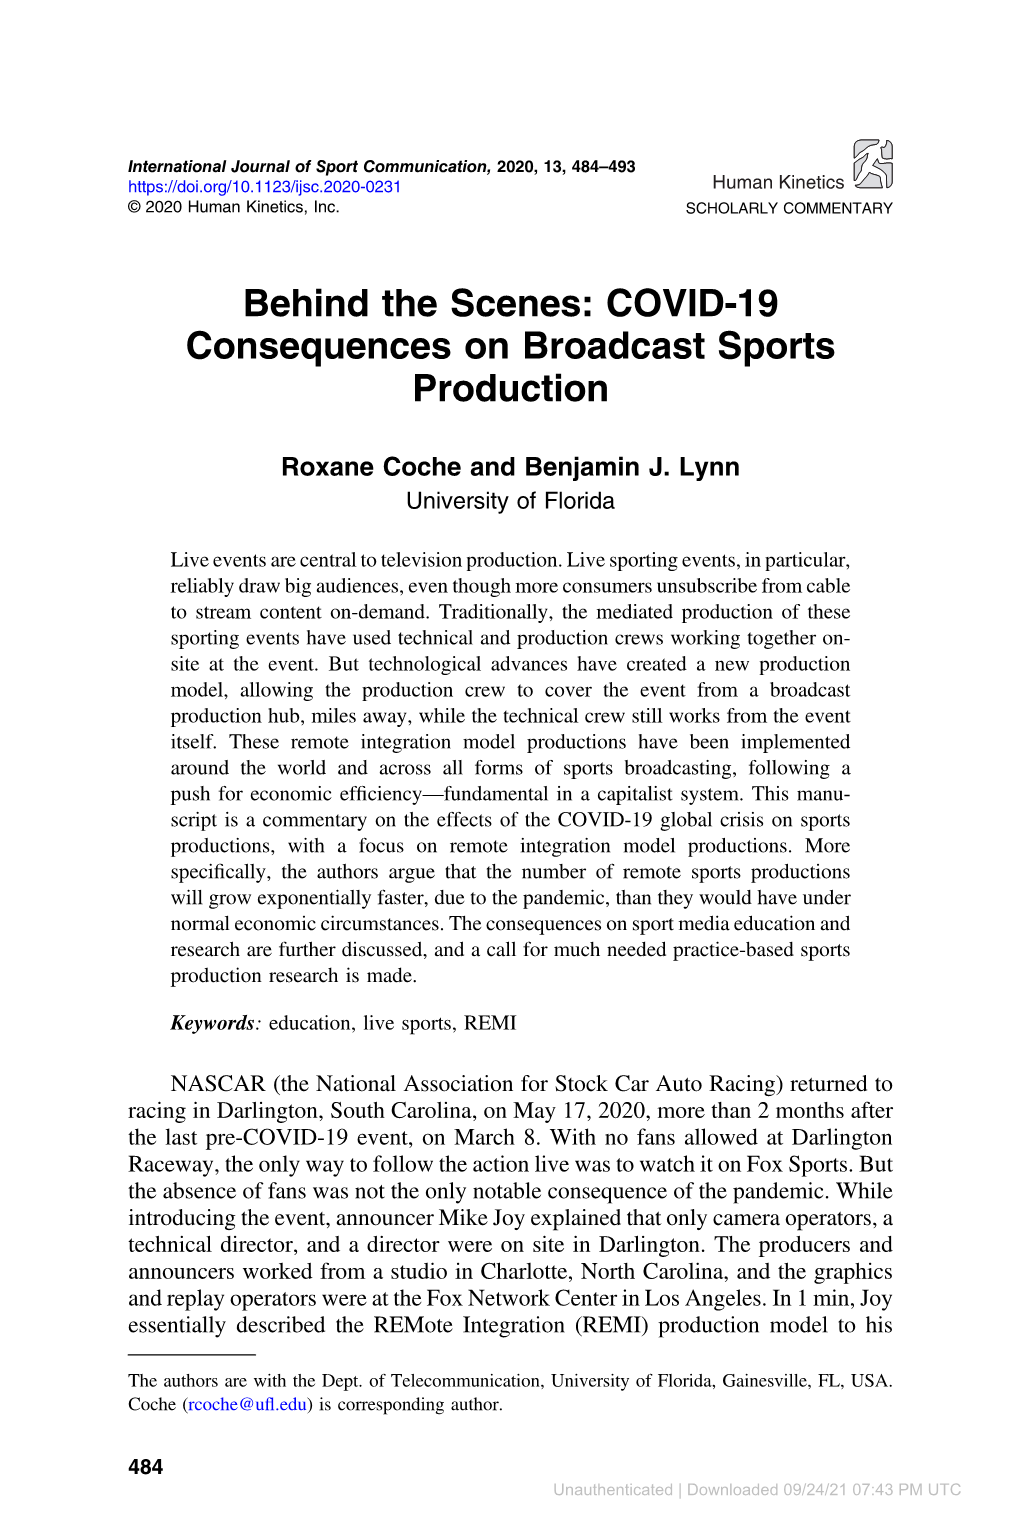 Behind the Scenes: COVID-19 Consequences on Broadcast Sports Production